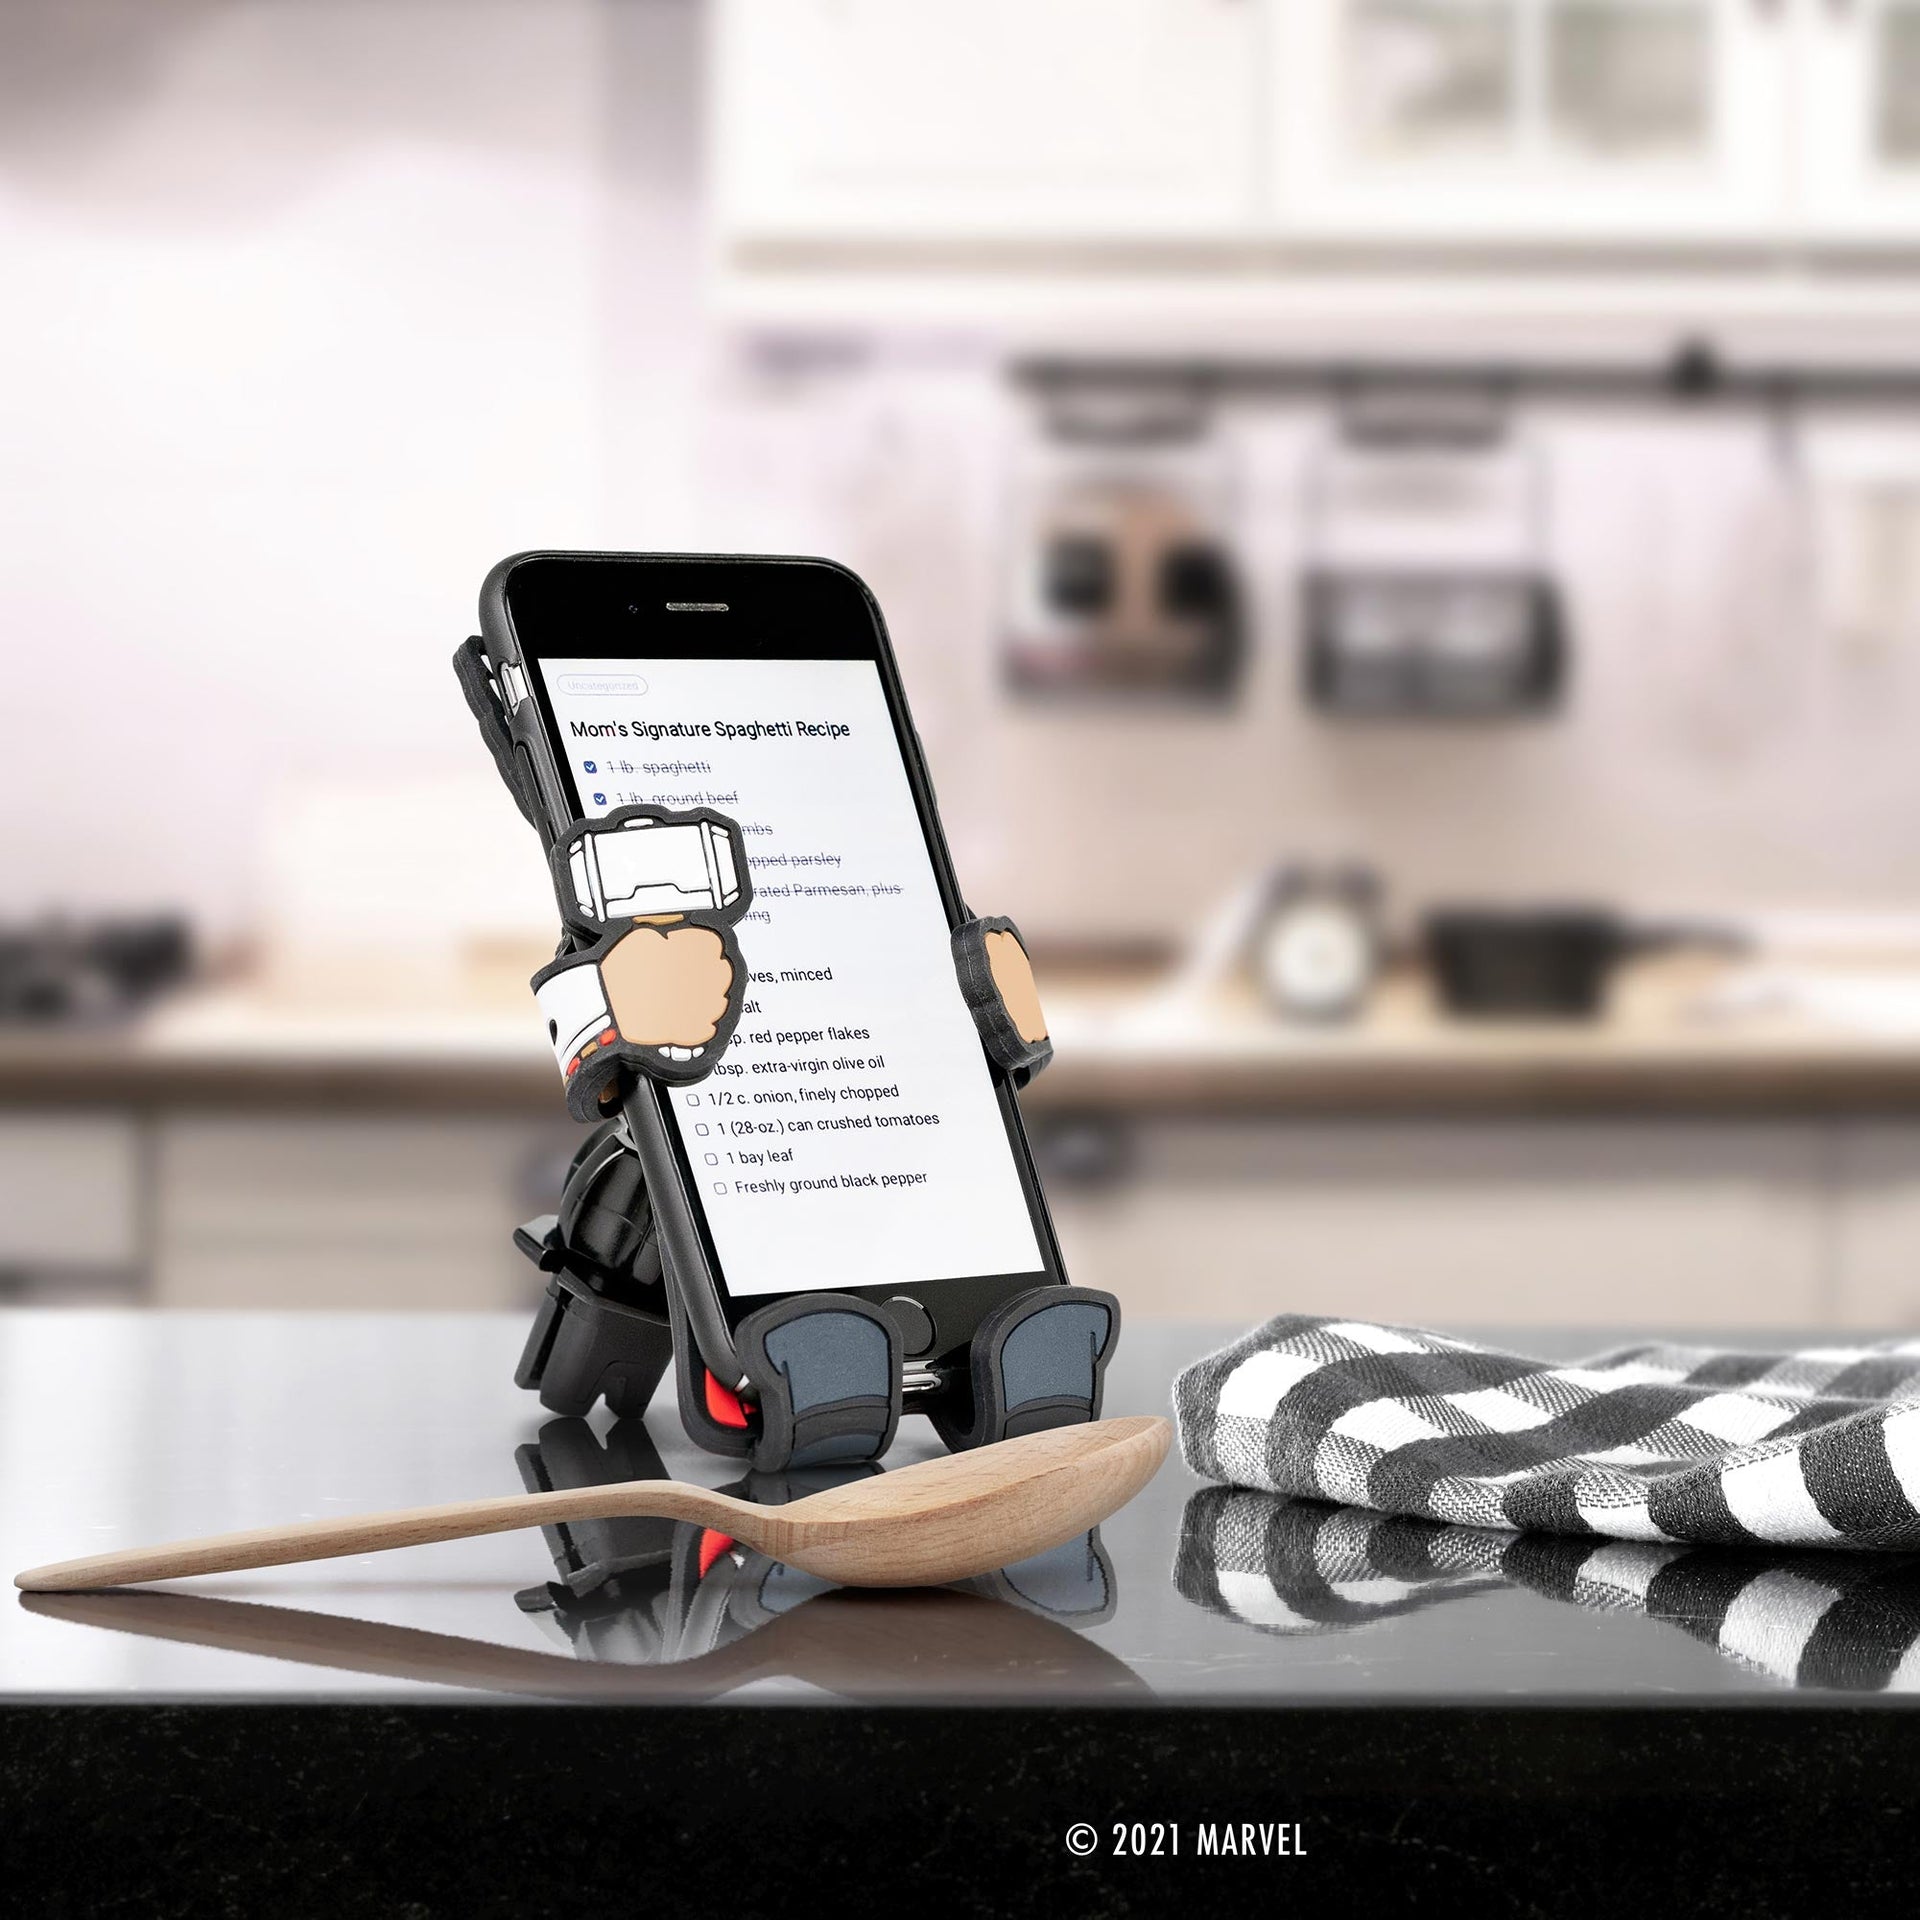 Image of Marvel Comics Thor Hug Buddy holding a phone with a recipe displayed on the screen, while resting on its vent clip on top of a kitchen counter